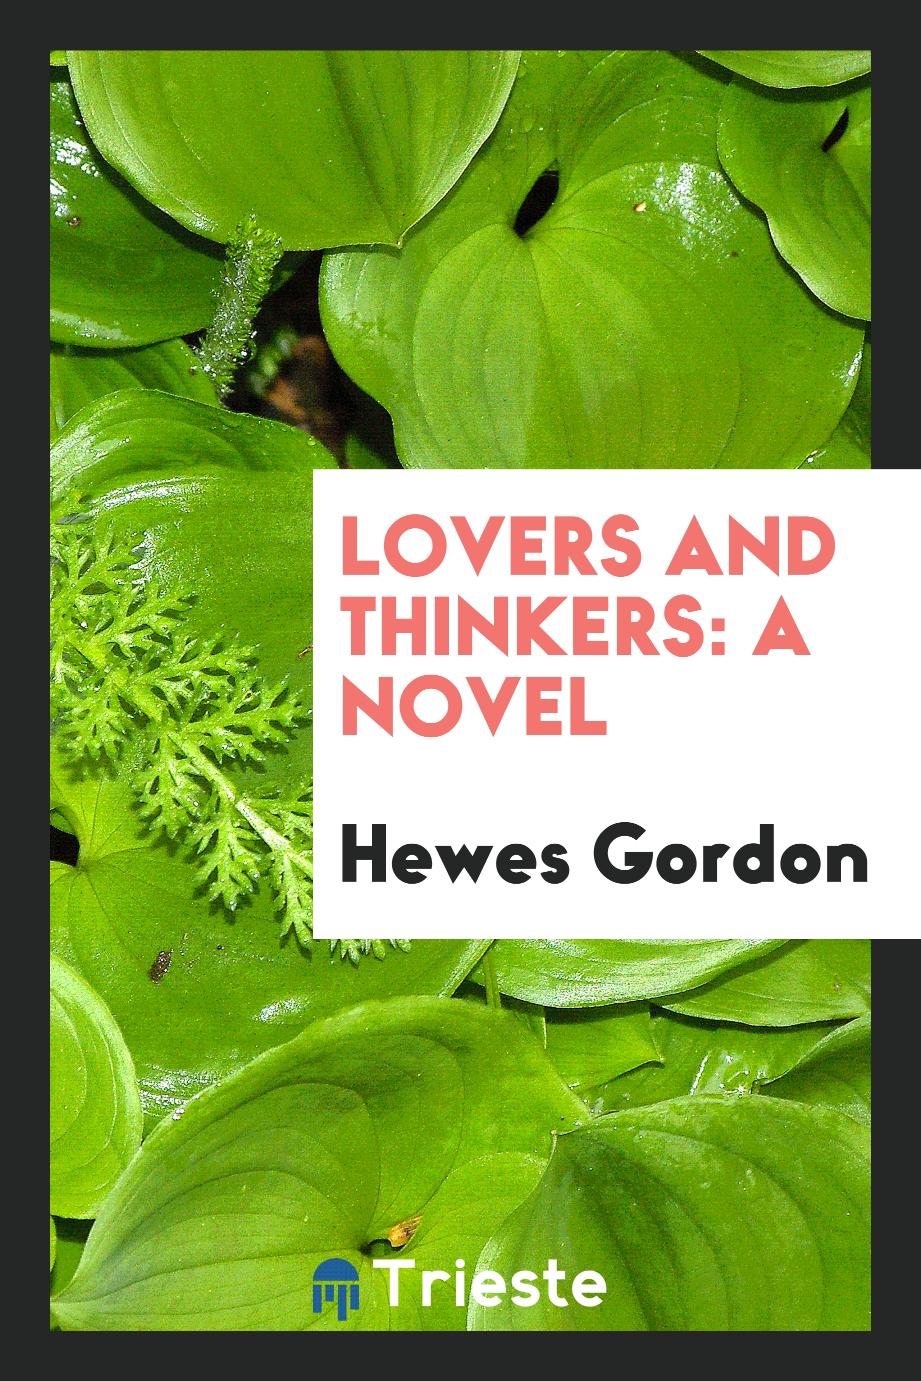 Lovers and thinkers: a novel